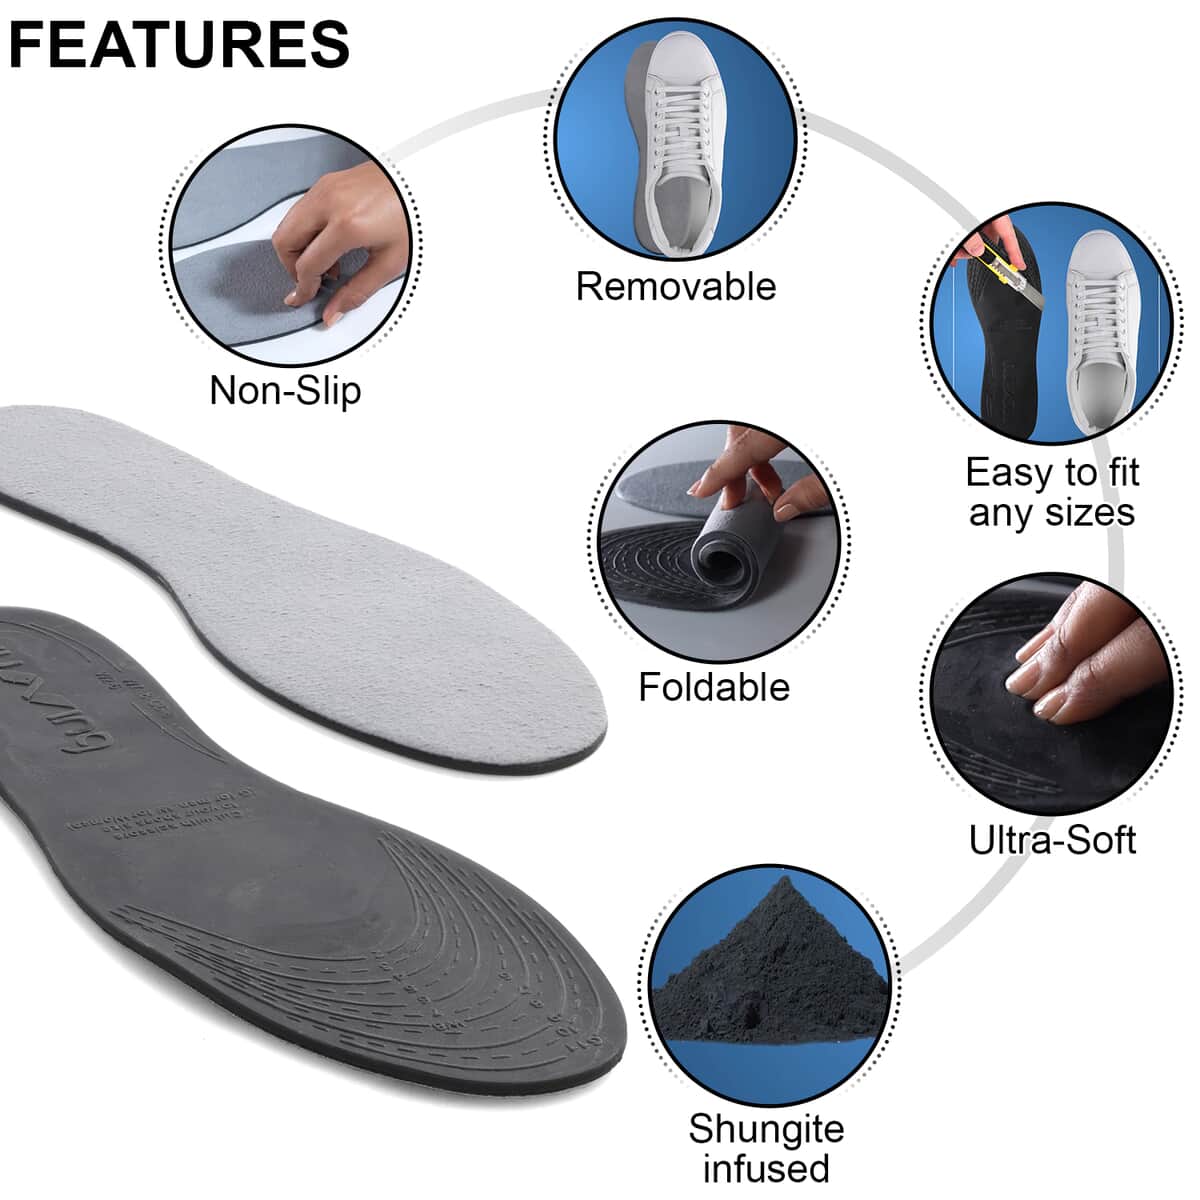 Pair of Gray and Green Shungite Infused Gel Insoles (Uses Gel Polymer) image number 2